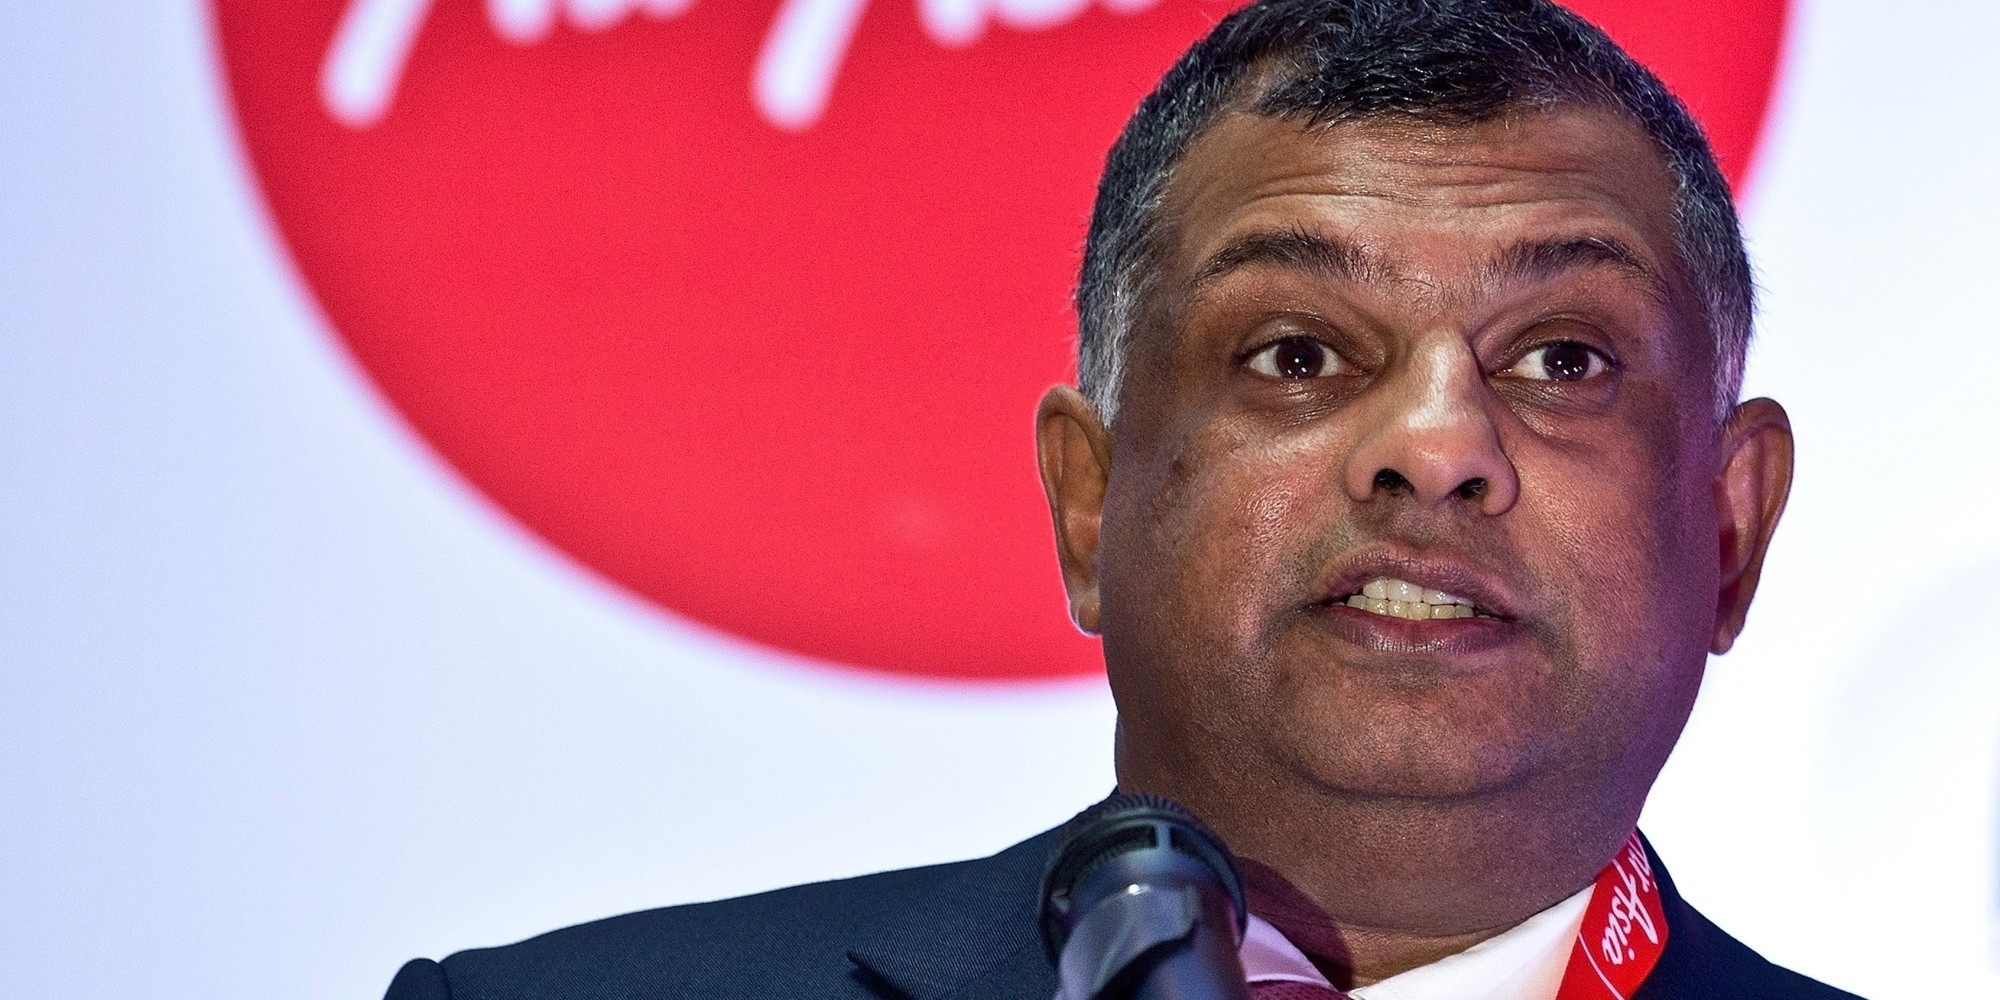 AirAsia flight QZ8501: Leadership of Tony Fernandes needed to deal with loss